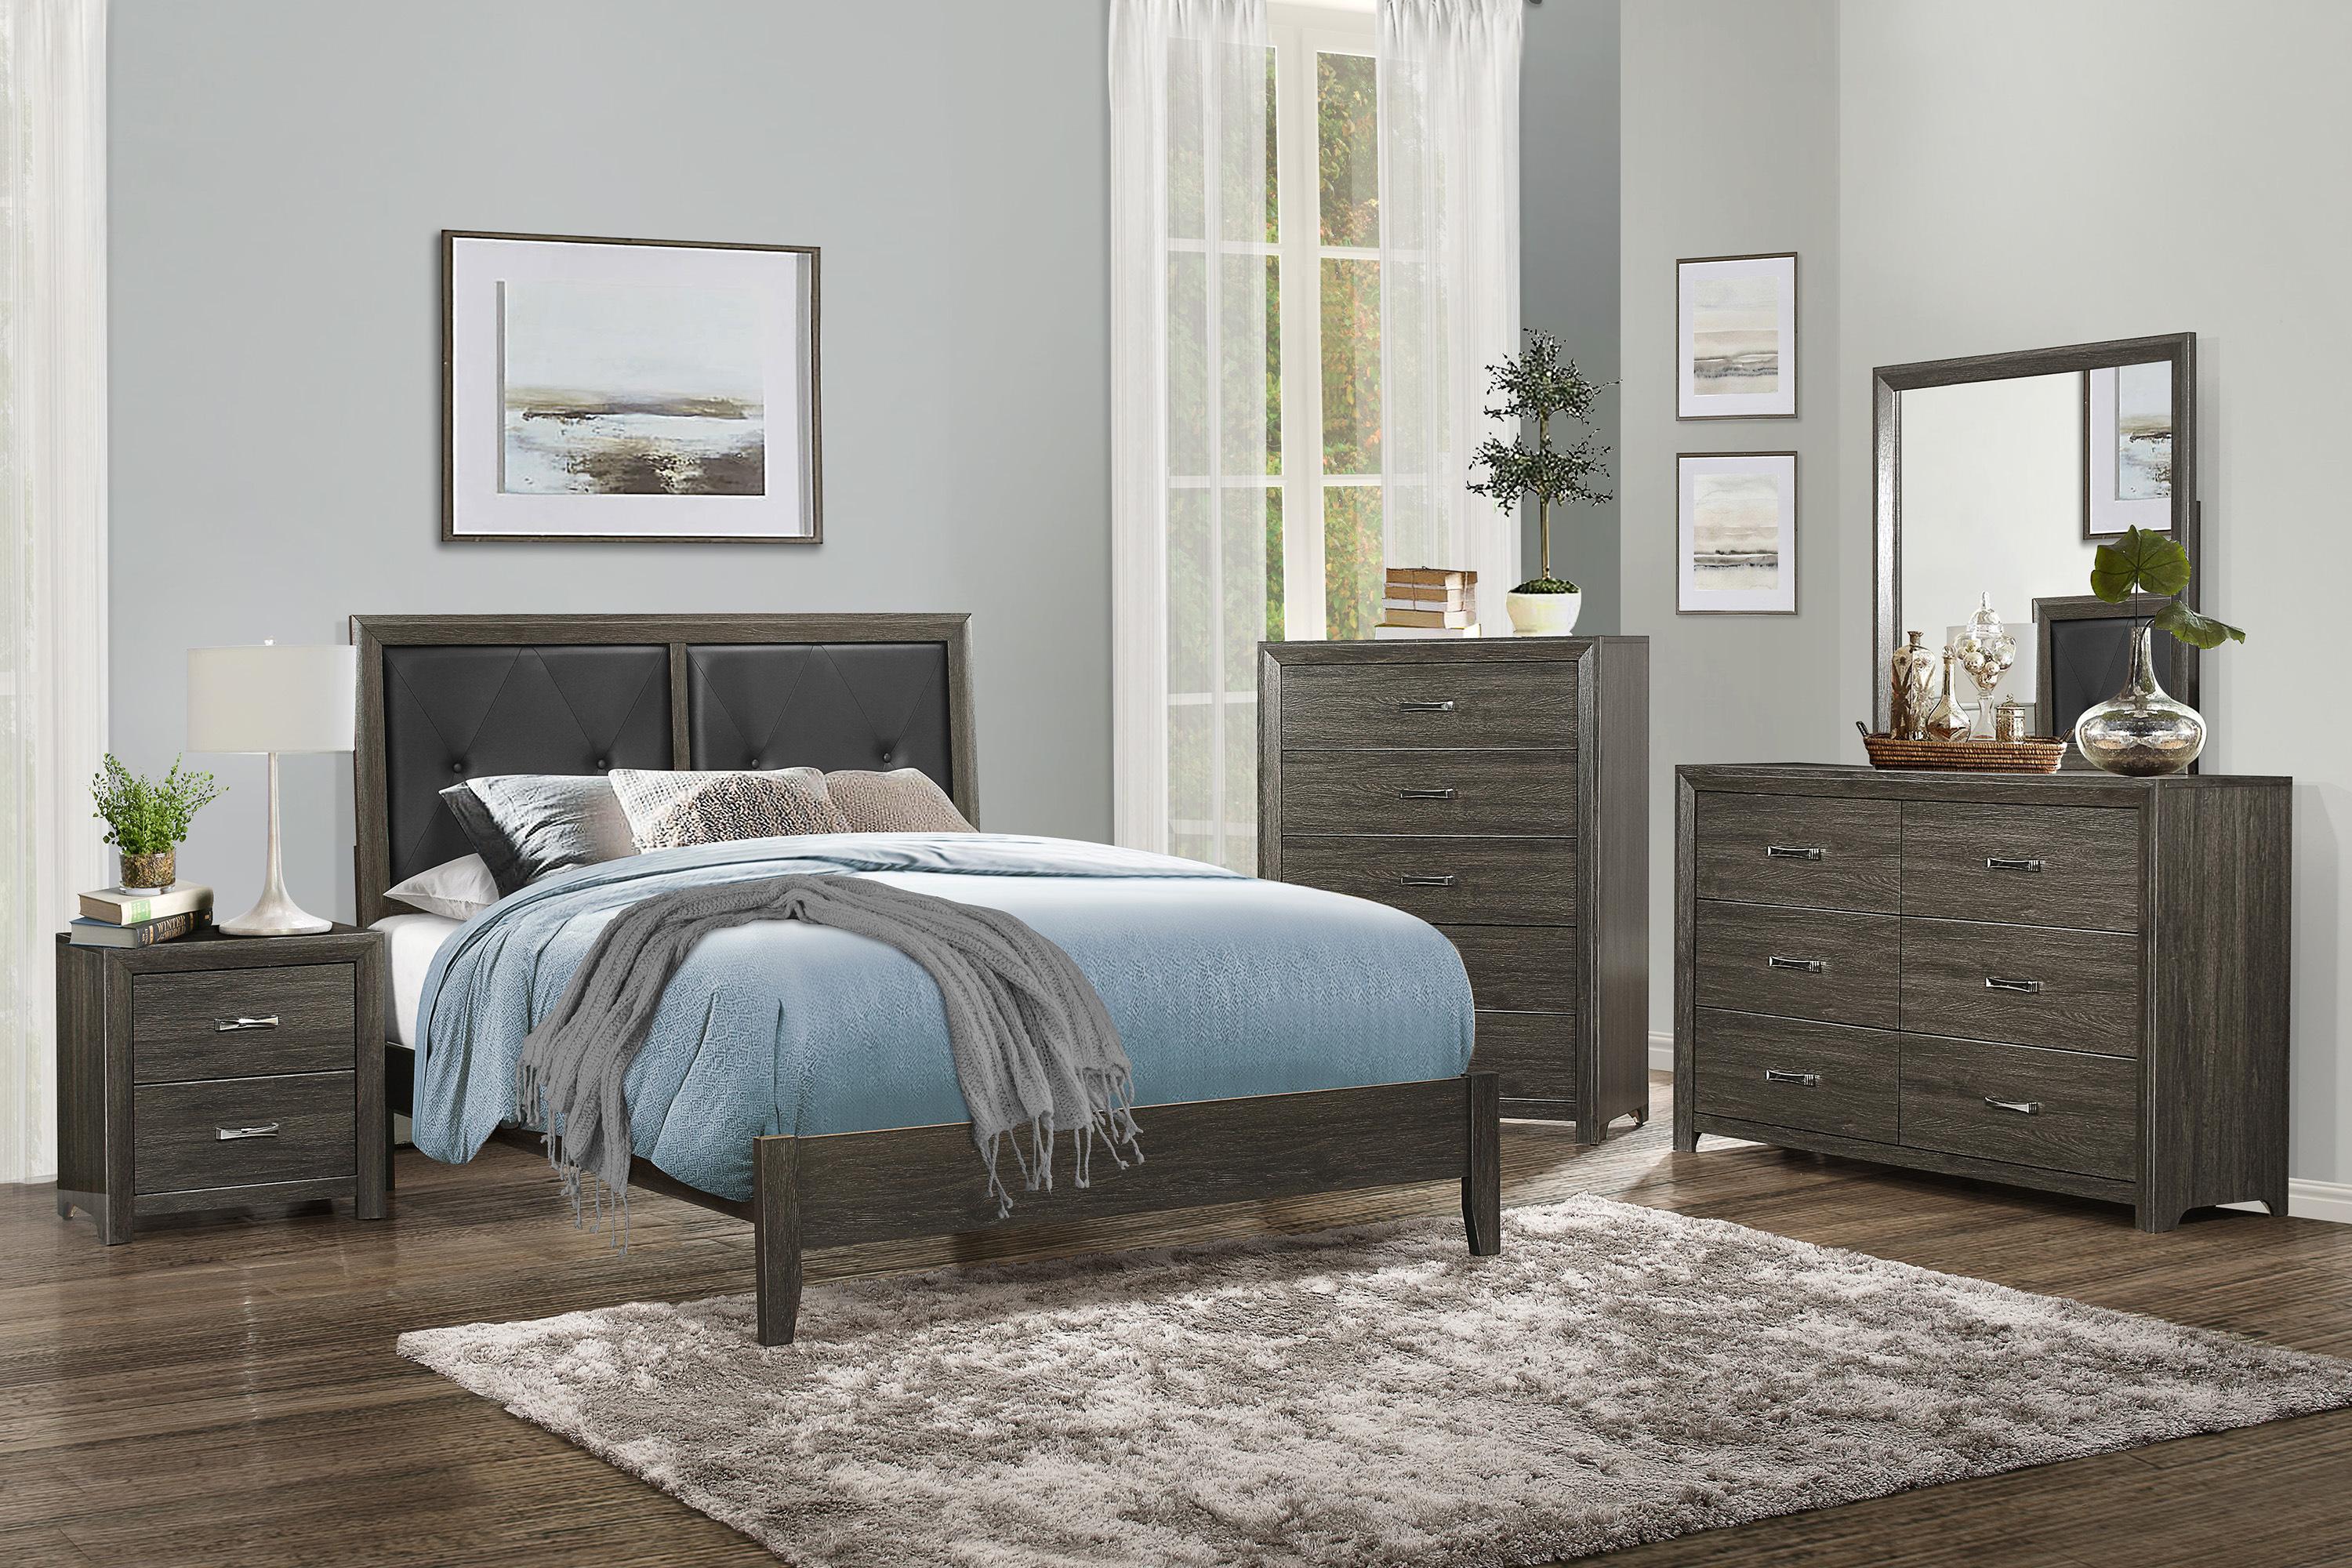 Contemporary Bedroom Set 2145FNP-1-5PC Edina 2145FNP-1-5PC in Dark Gray Faux Leather